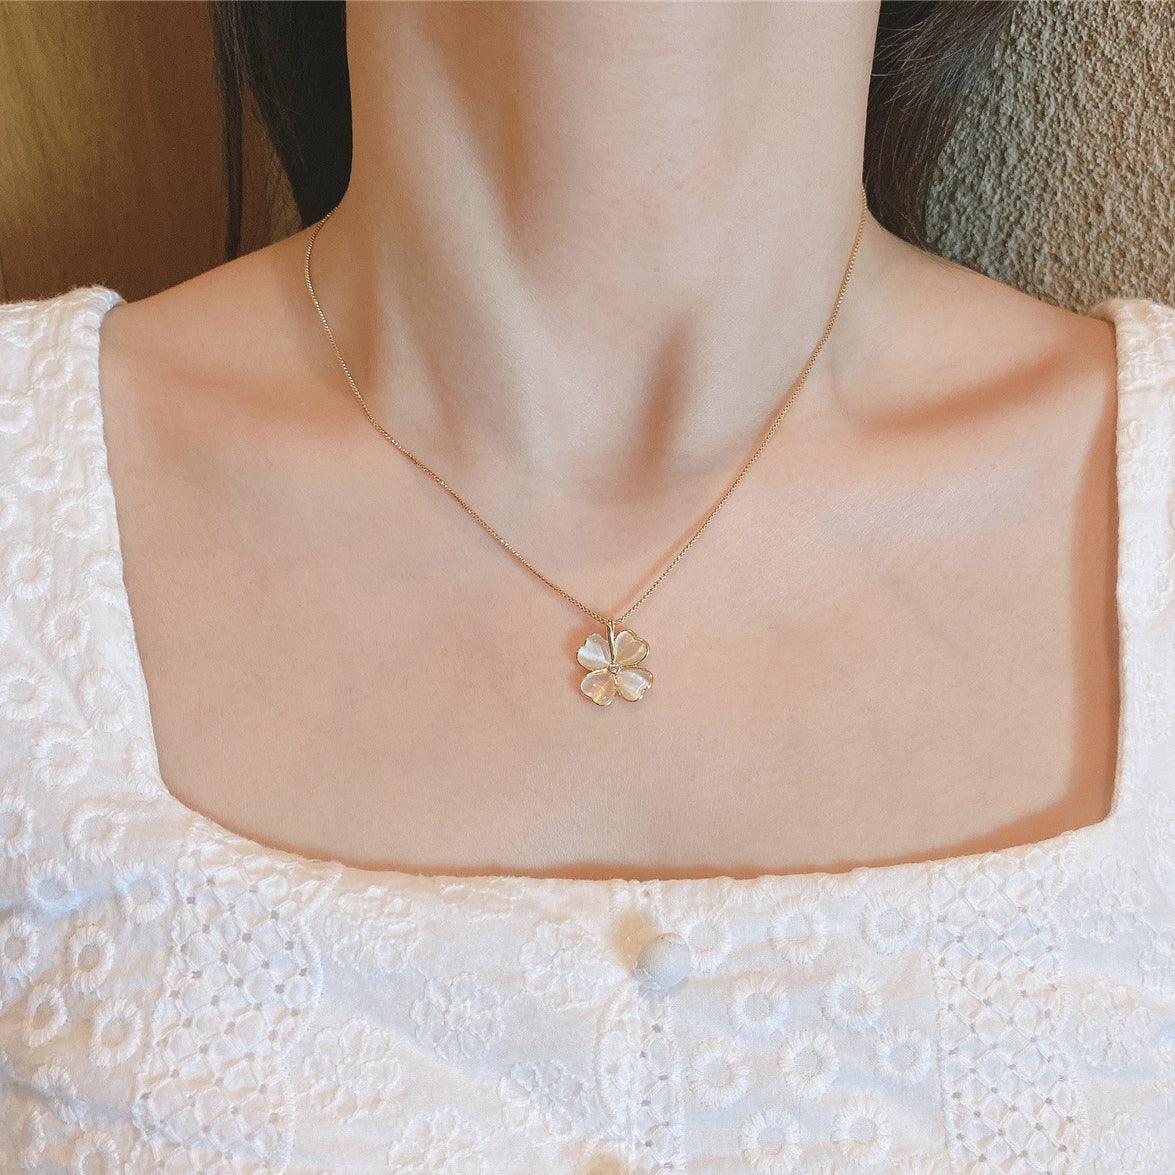 Gold Plated Heart Four-Leaf Clover Shape Necklace - Maple